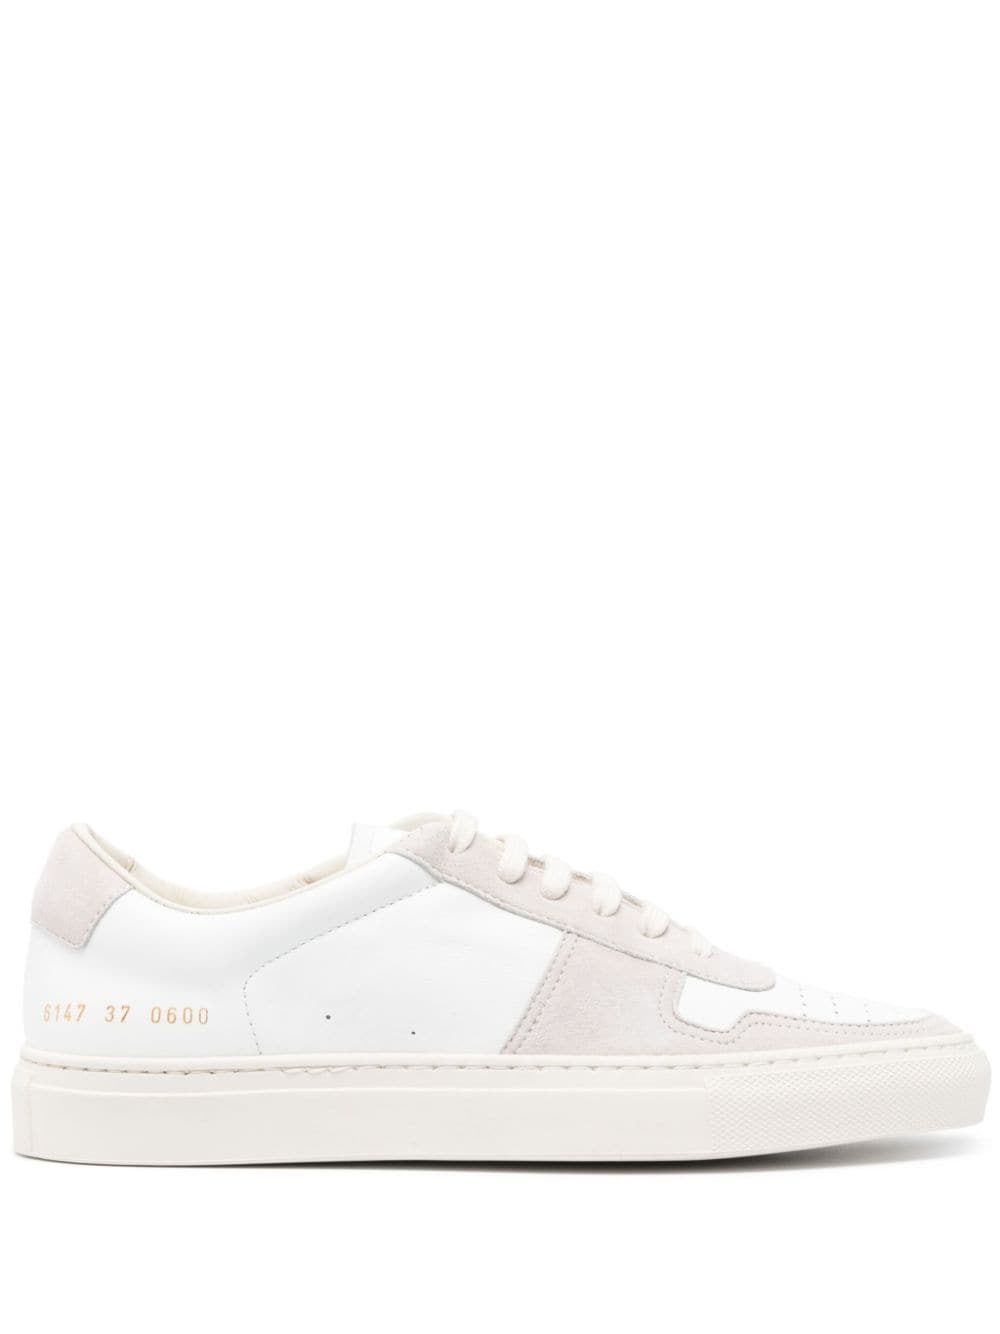 Common Projects Bball 拼接运动鞋 In White